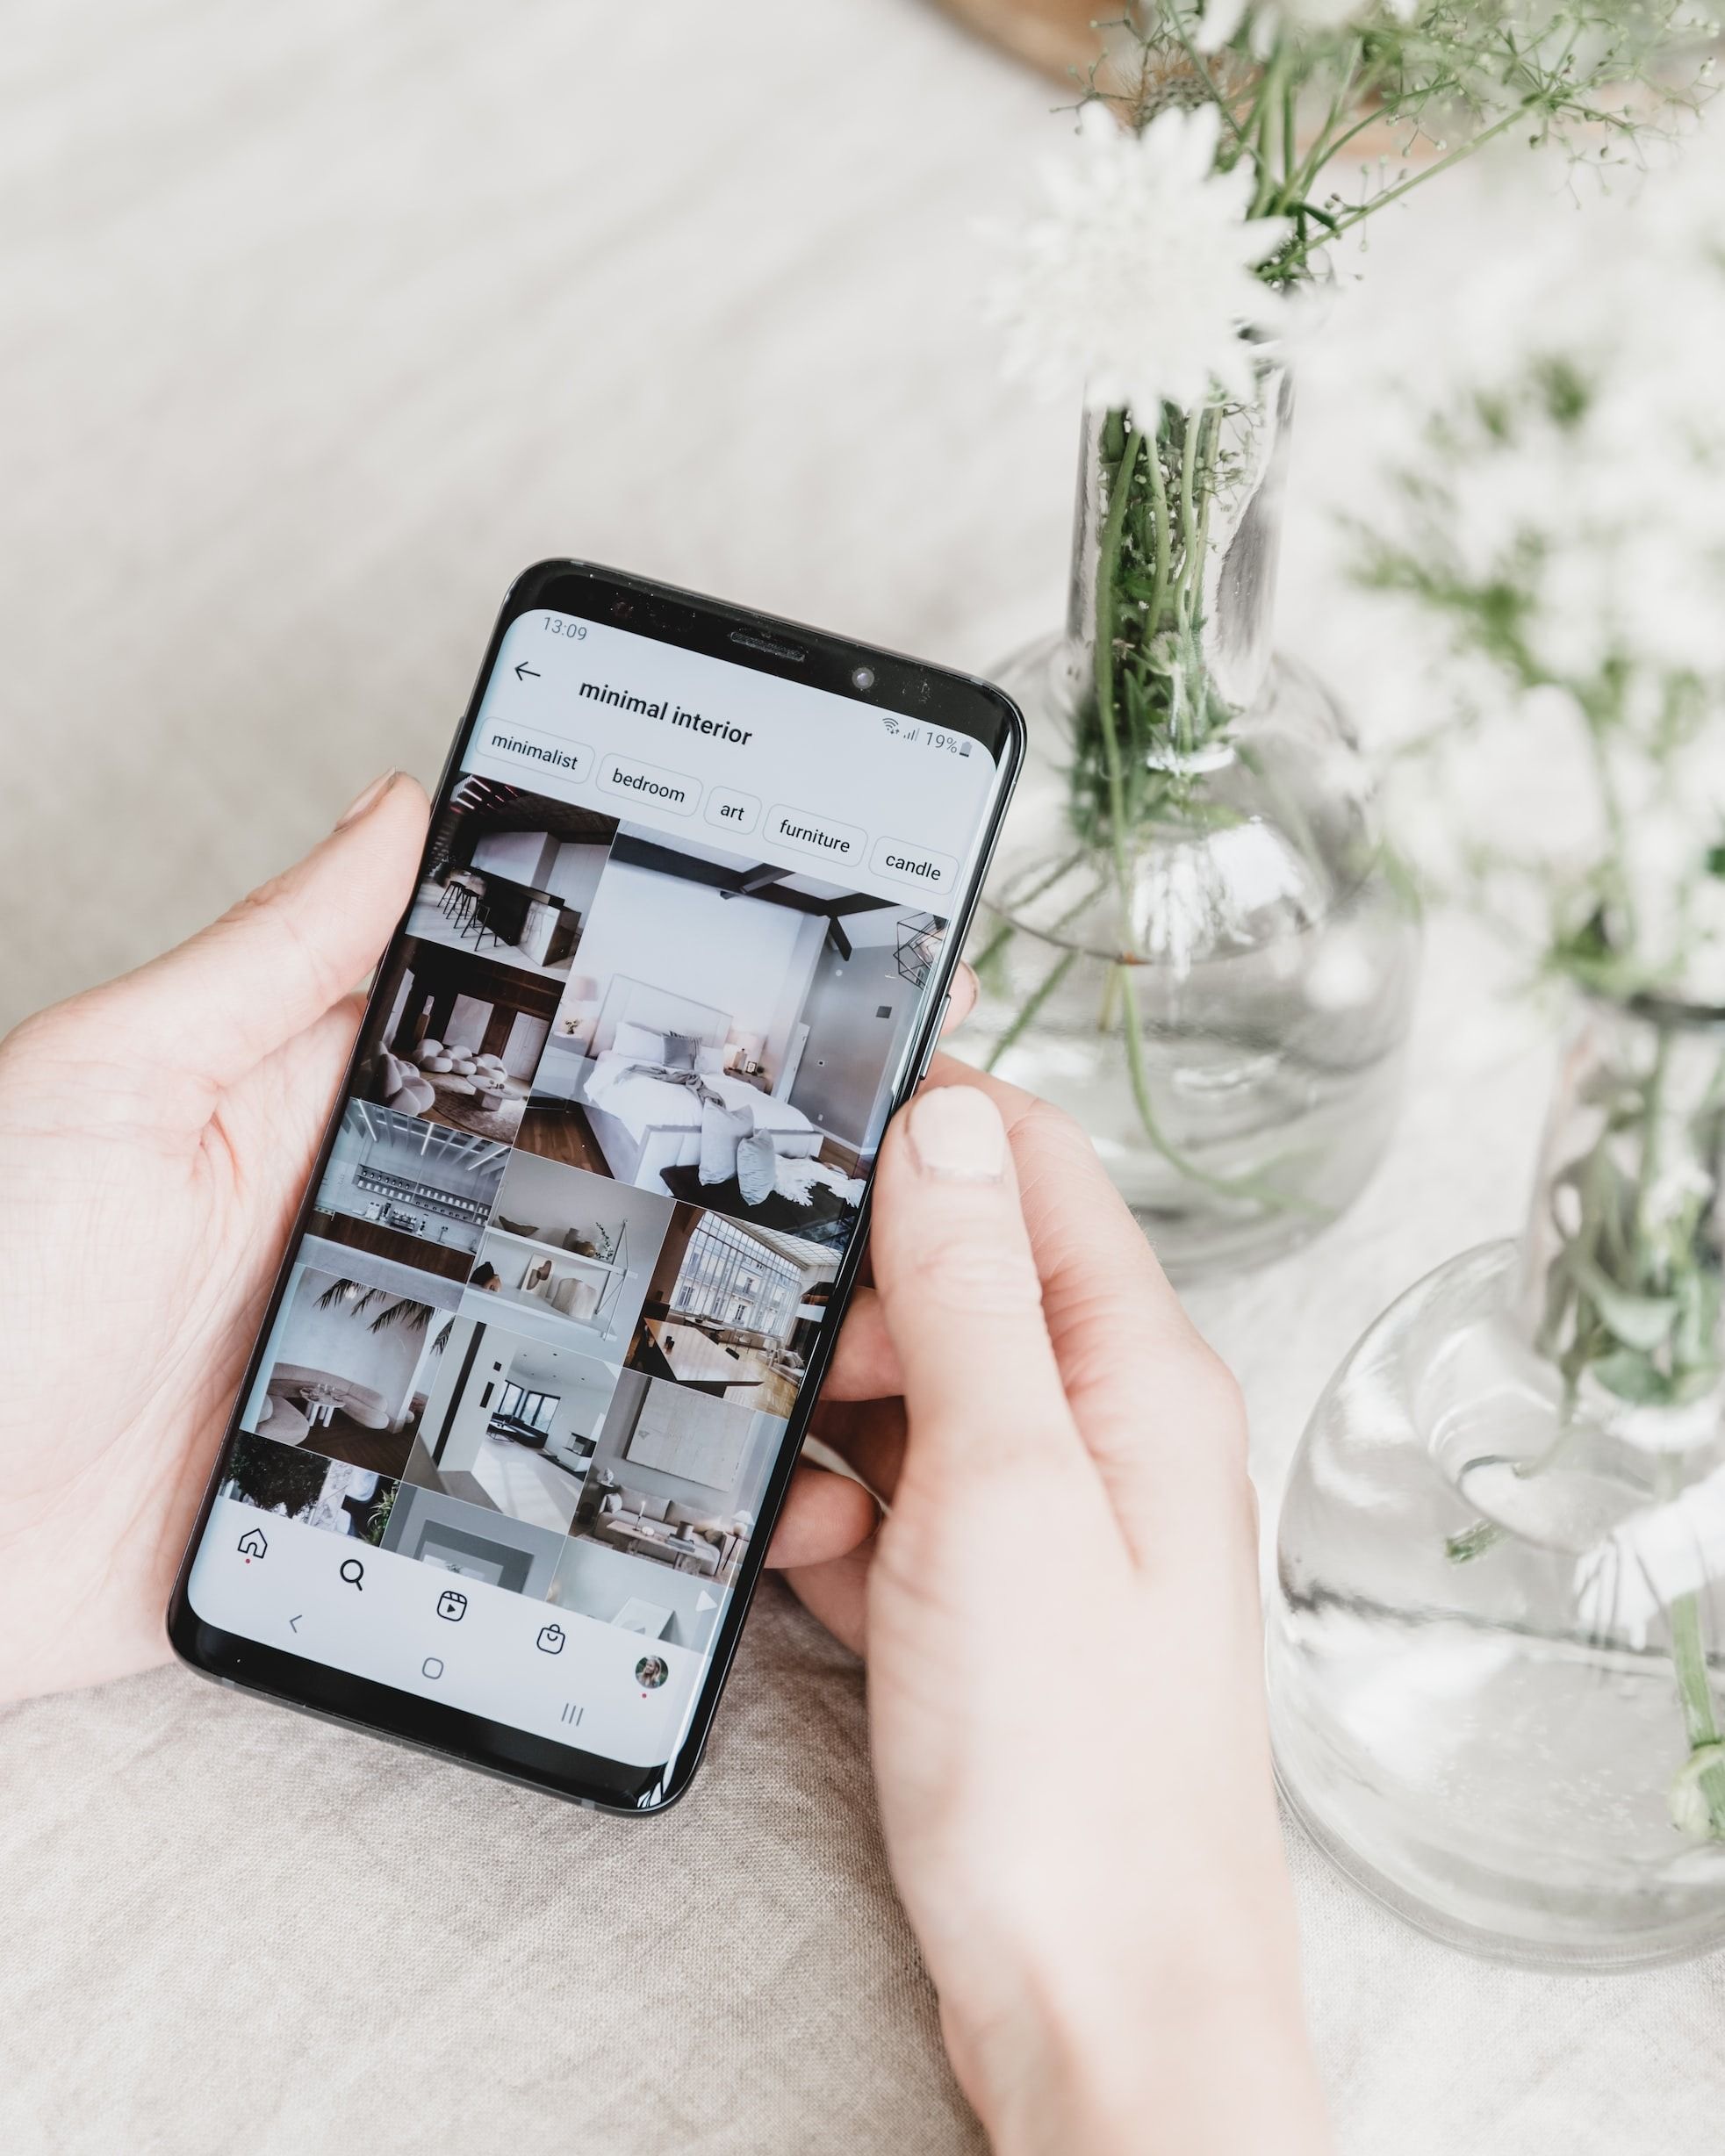 The Instagram Post Predicament: How, When, and Why to Delete Posts